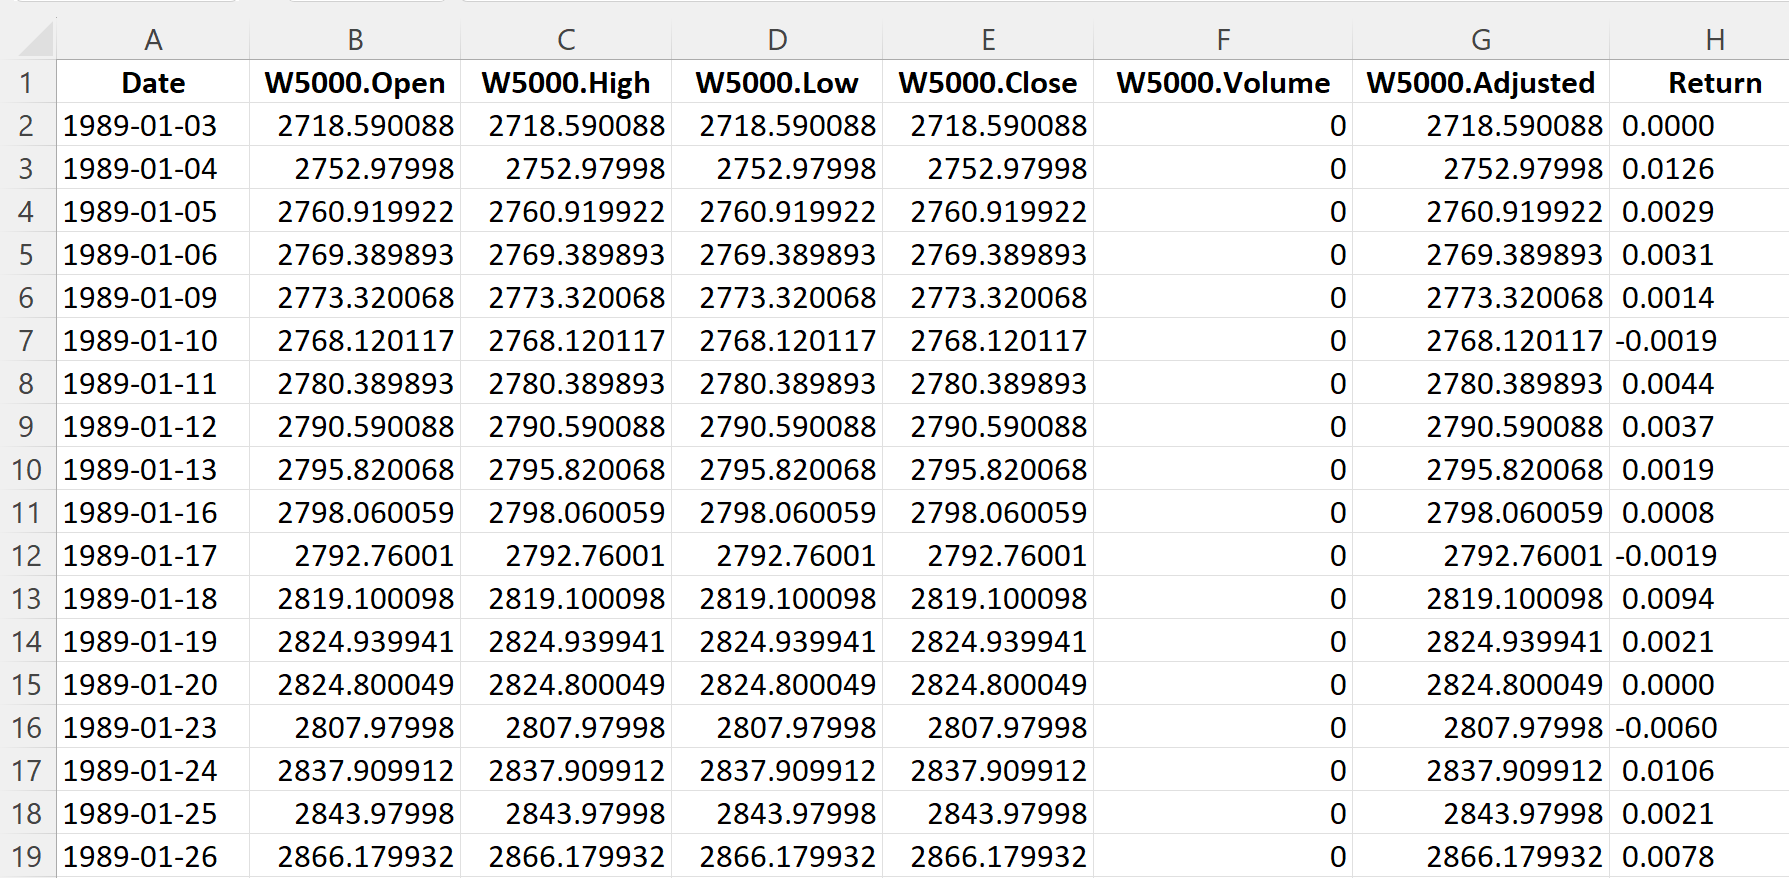 Top of the file for the Wilshire 5000 index data